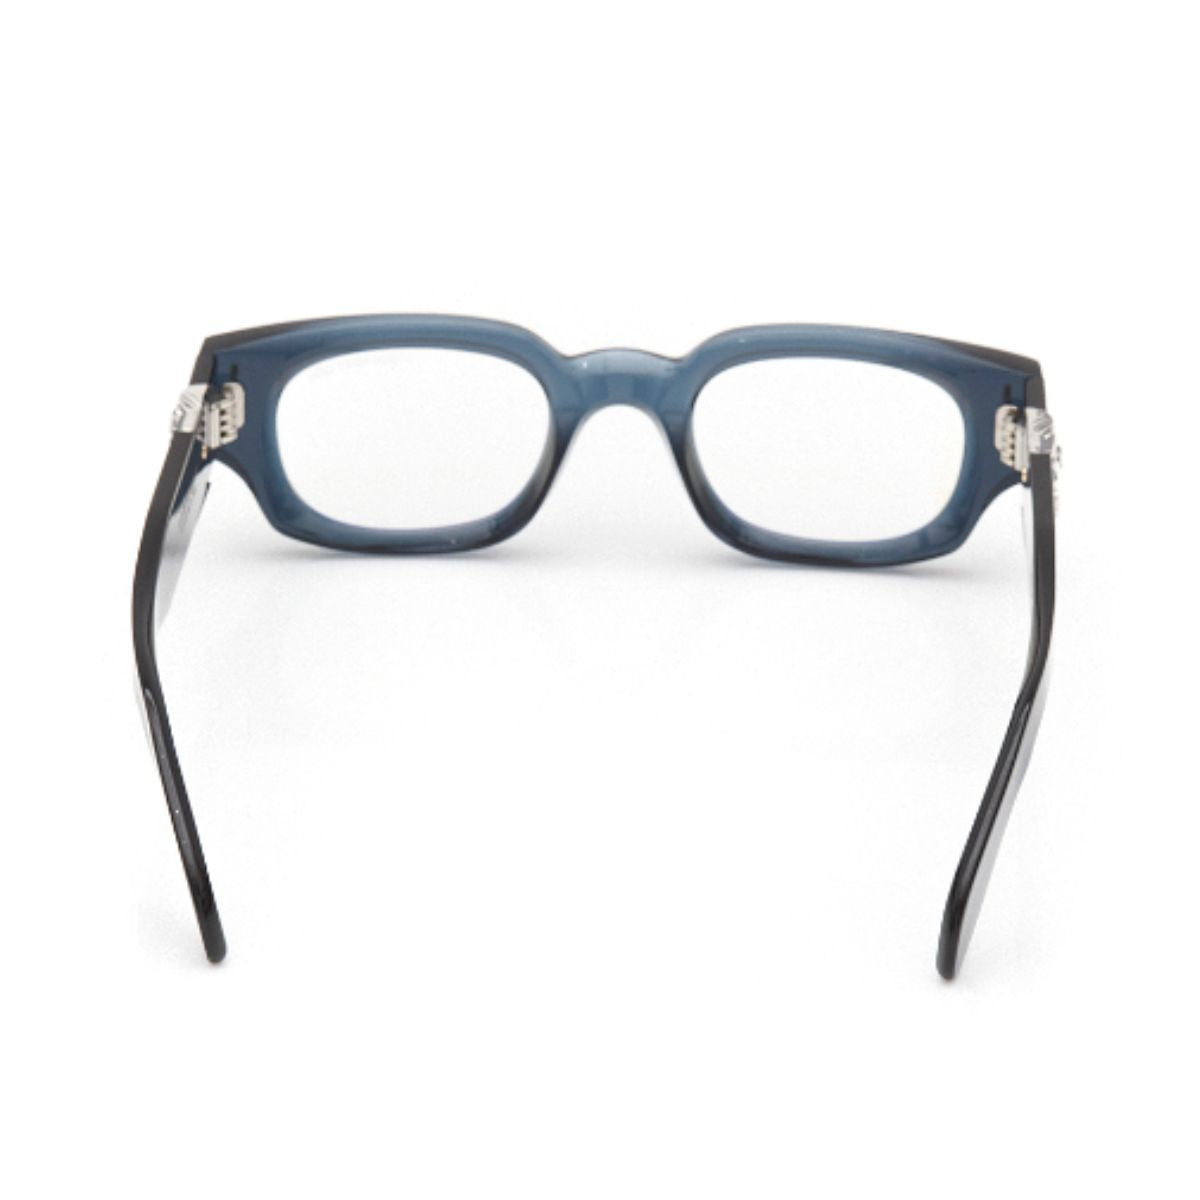 "Buy Cutler and Gross Frame For Mens online at Optorium"